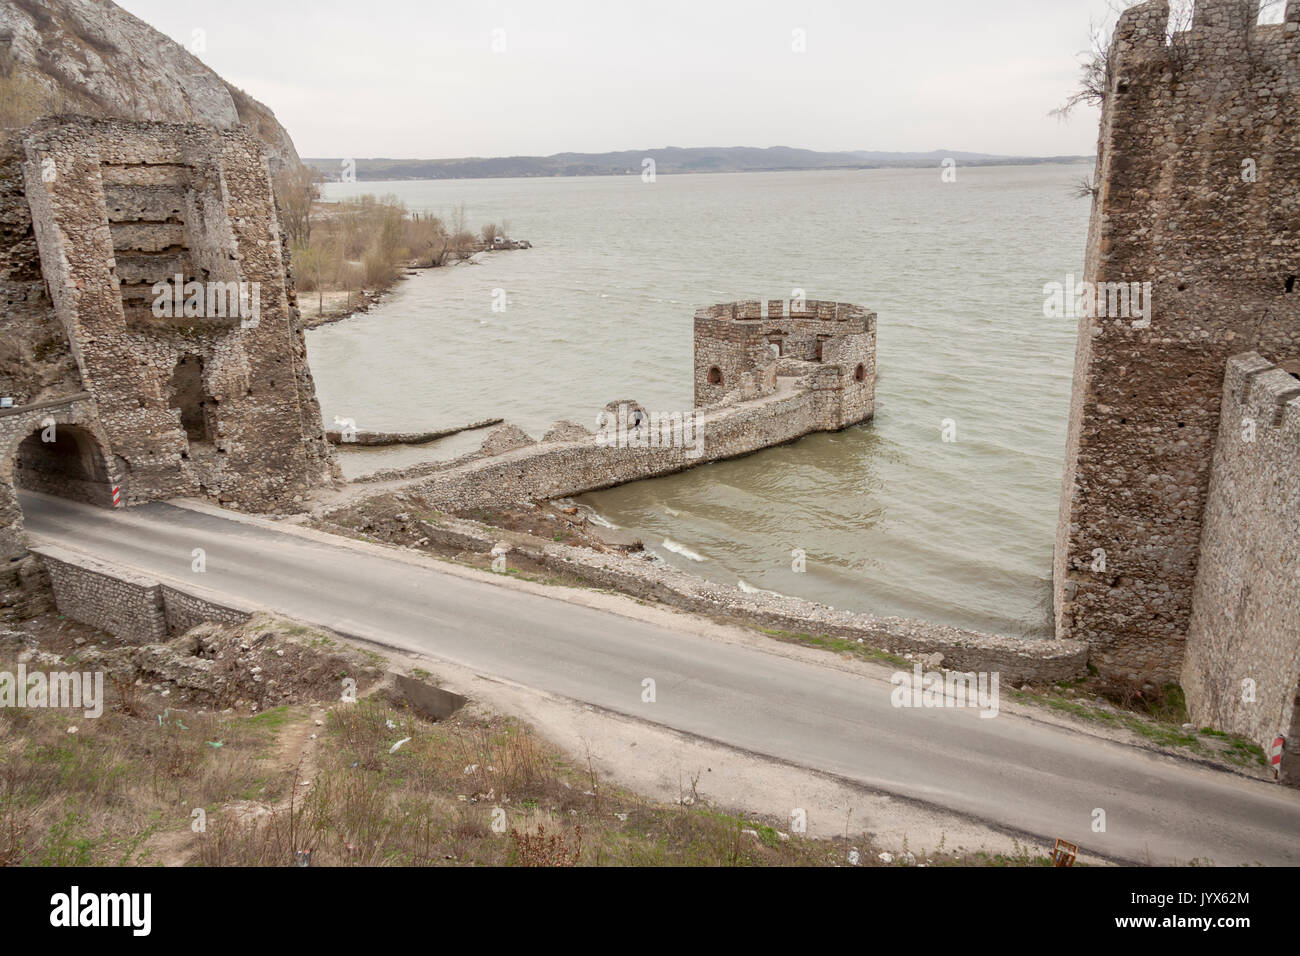 Golubac Fortress - 12th century castle located at the entrance of river Danube. North Serbia. Stock Photo